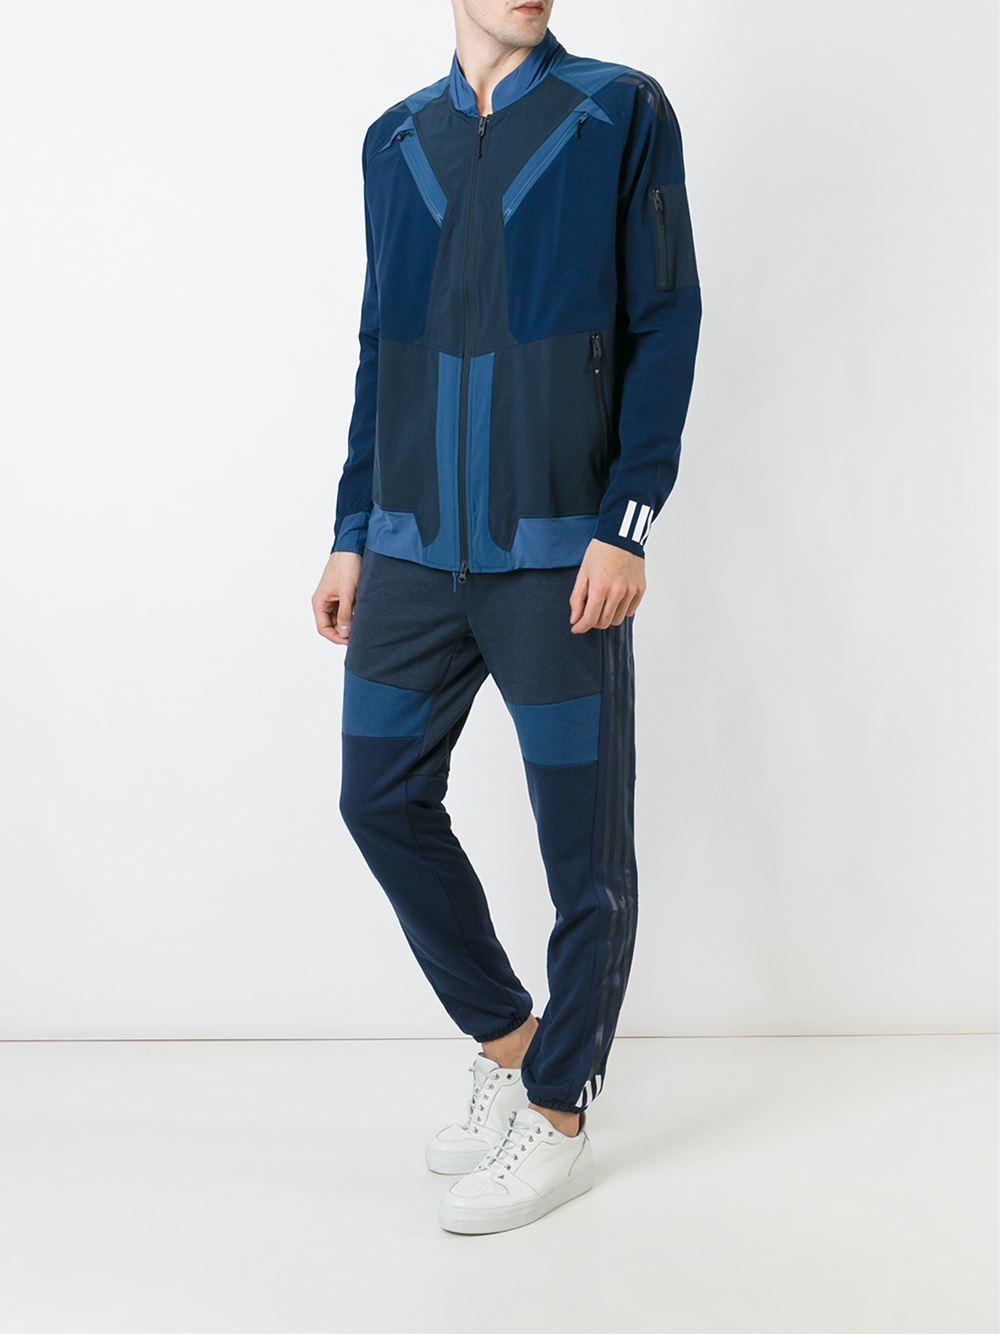 adidas Originals X White Mountaineering Track Jacket in Blue (Black) for  Men - Lyst